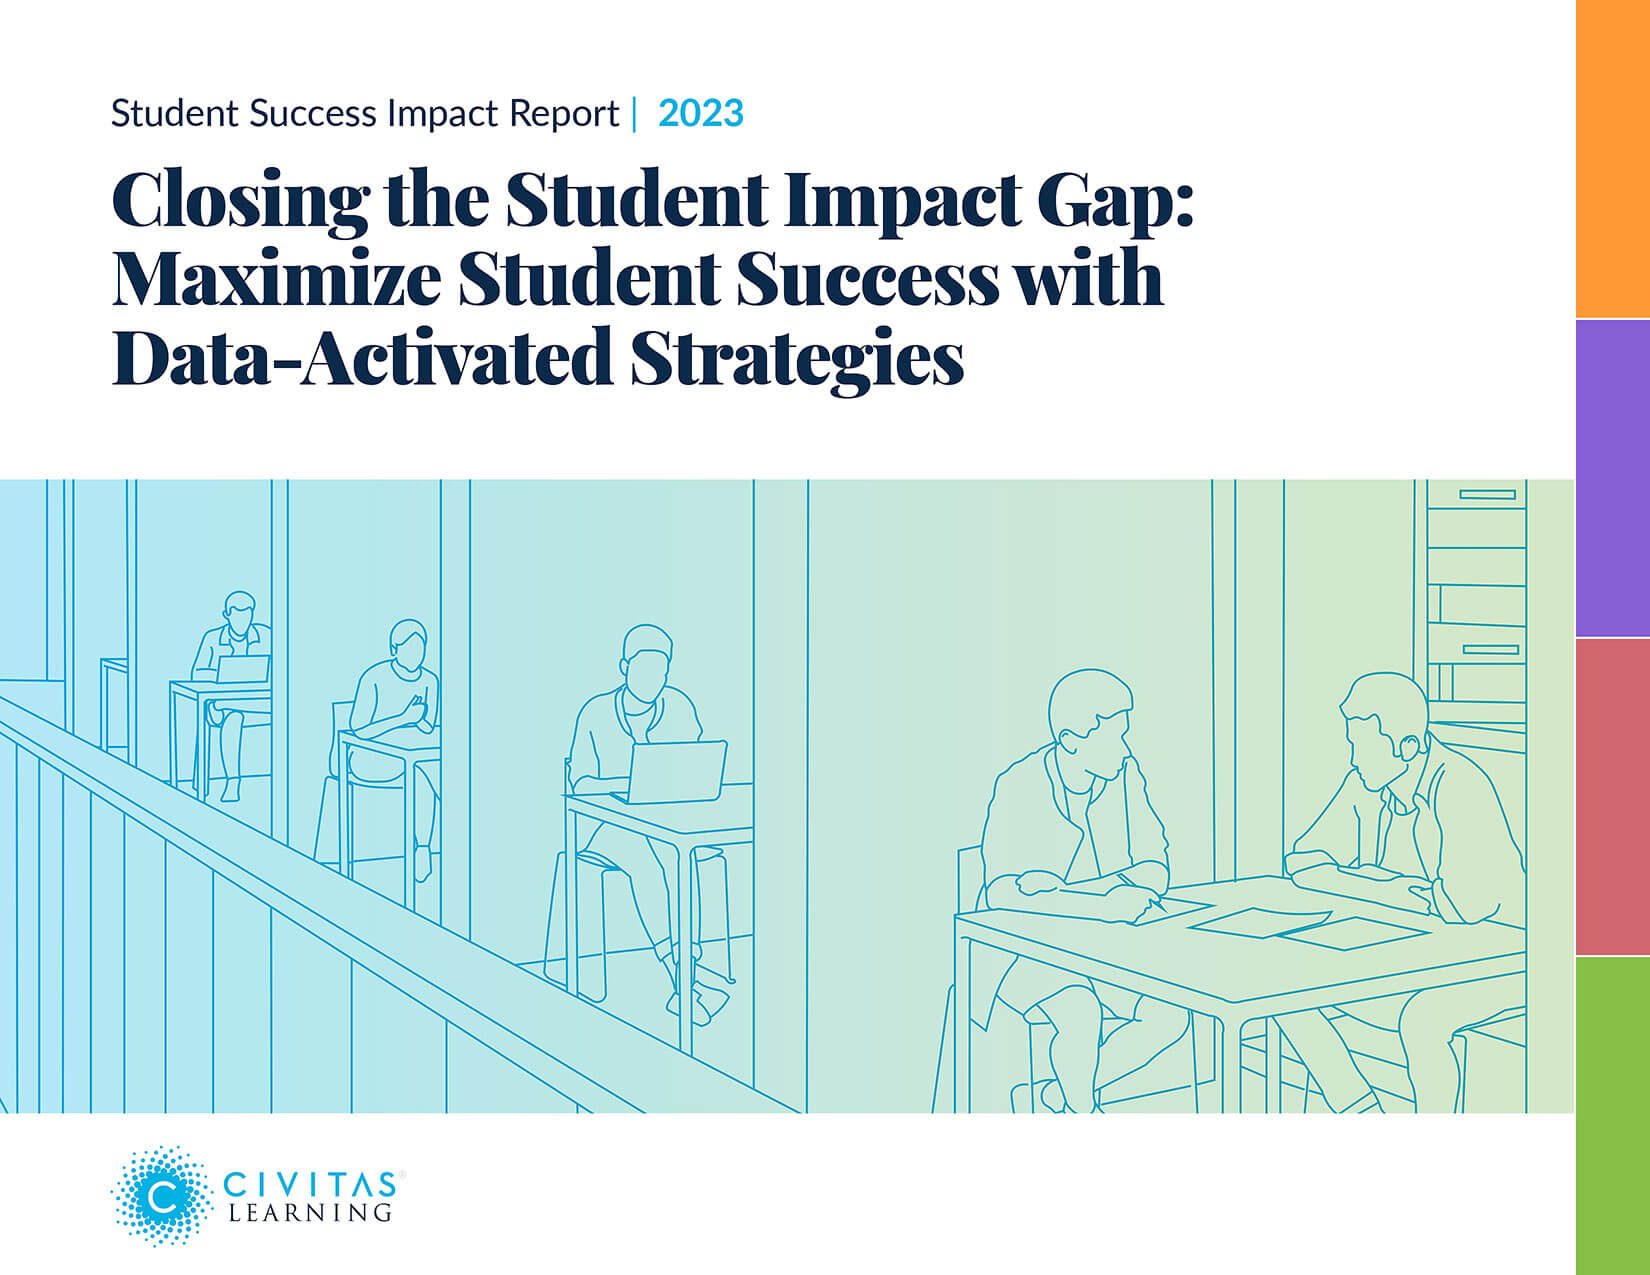 Cover art for the Civitas Learning 2023 Student Success Impact Report: Closing the Student Impact Gap: Maximize Student Success with Data-Activated Strategies